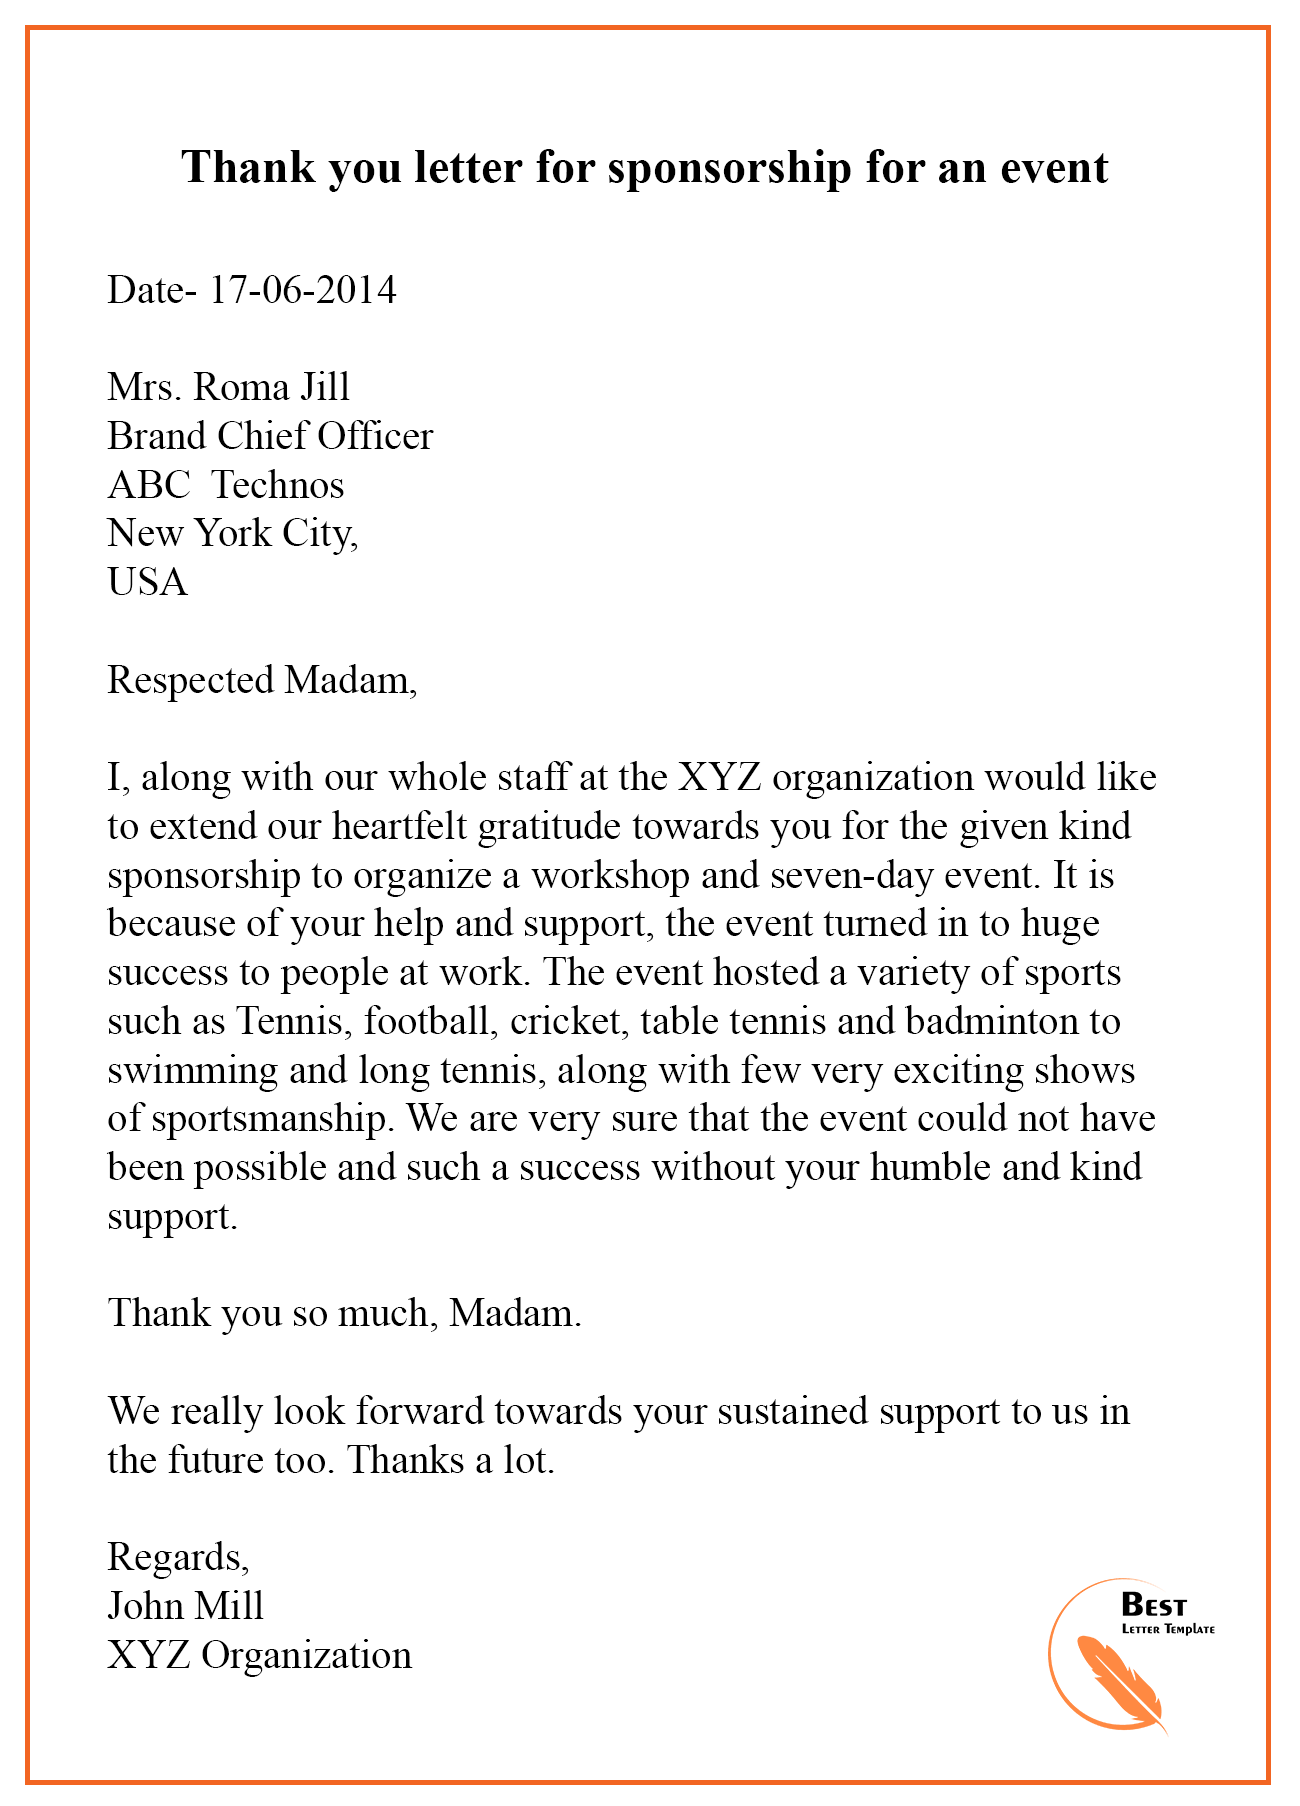 Thank You Letter Template for Sponsorship - Sample & Examples